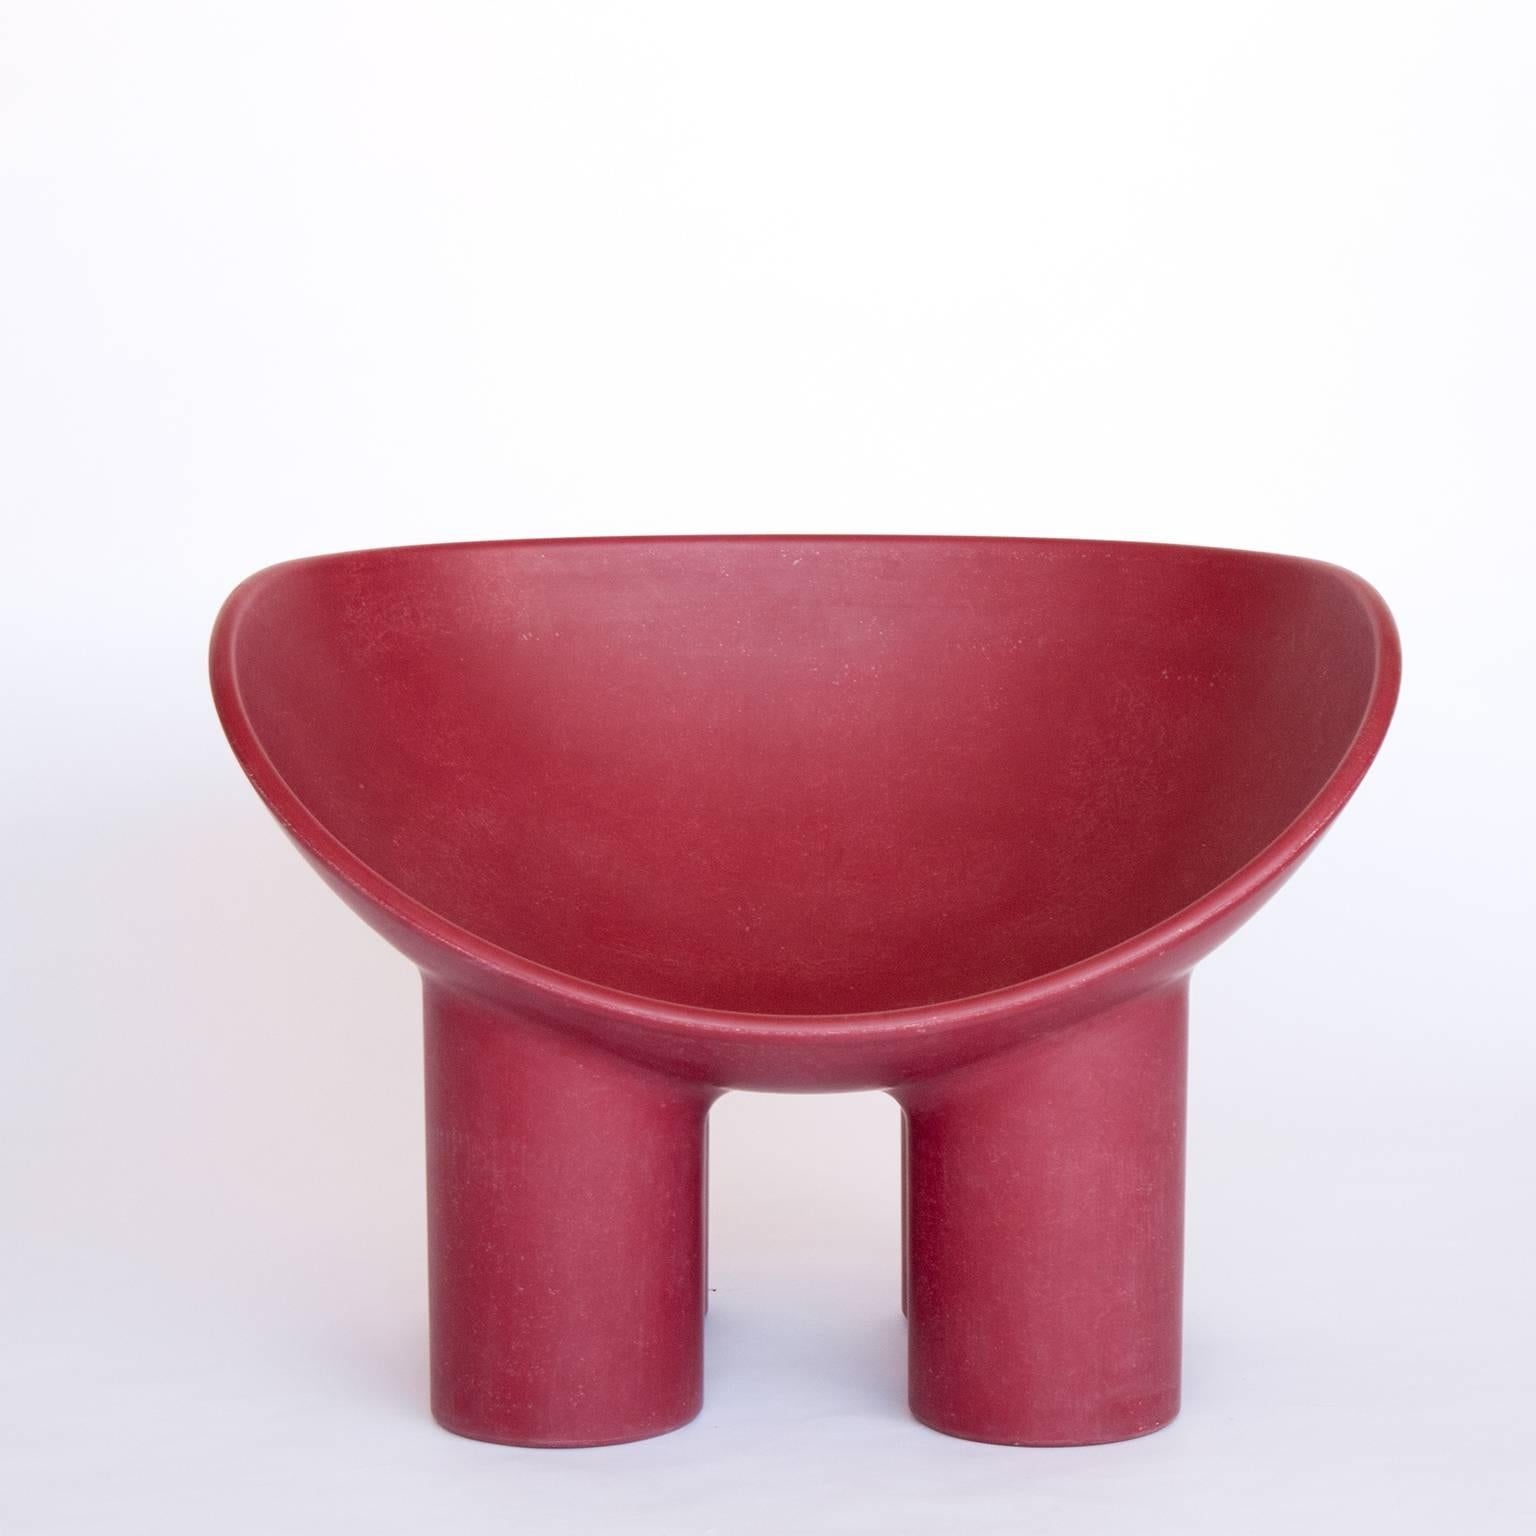 Faye Toogood

One piece currently available. Production time on new pieces is 7-8 weeks.

Standing on four chunky legs, this dish-shaped seat is crafted in darkened raw fiberglass for strength and durability.

Oxblood red fiberglass
suitable